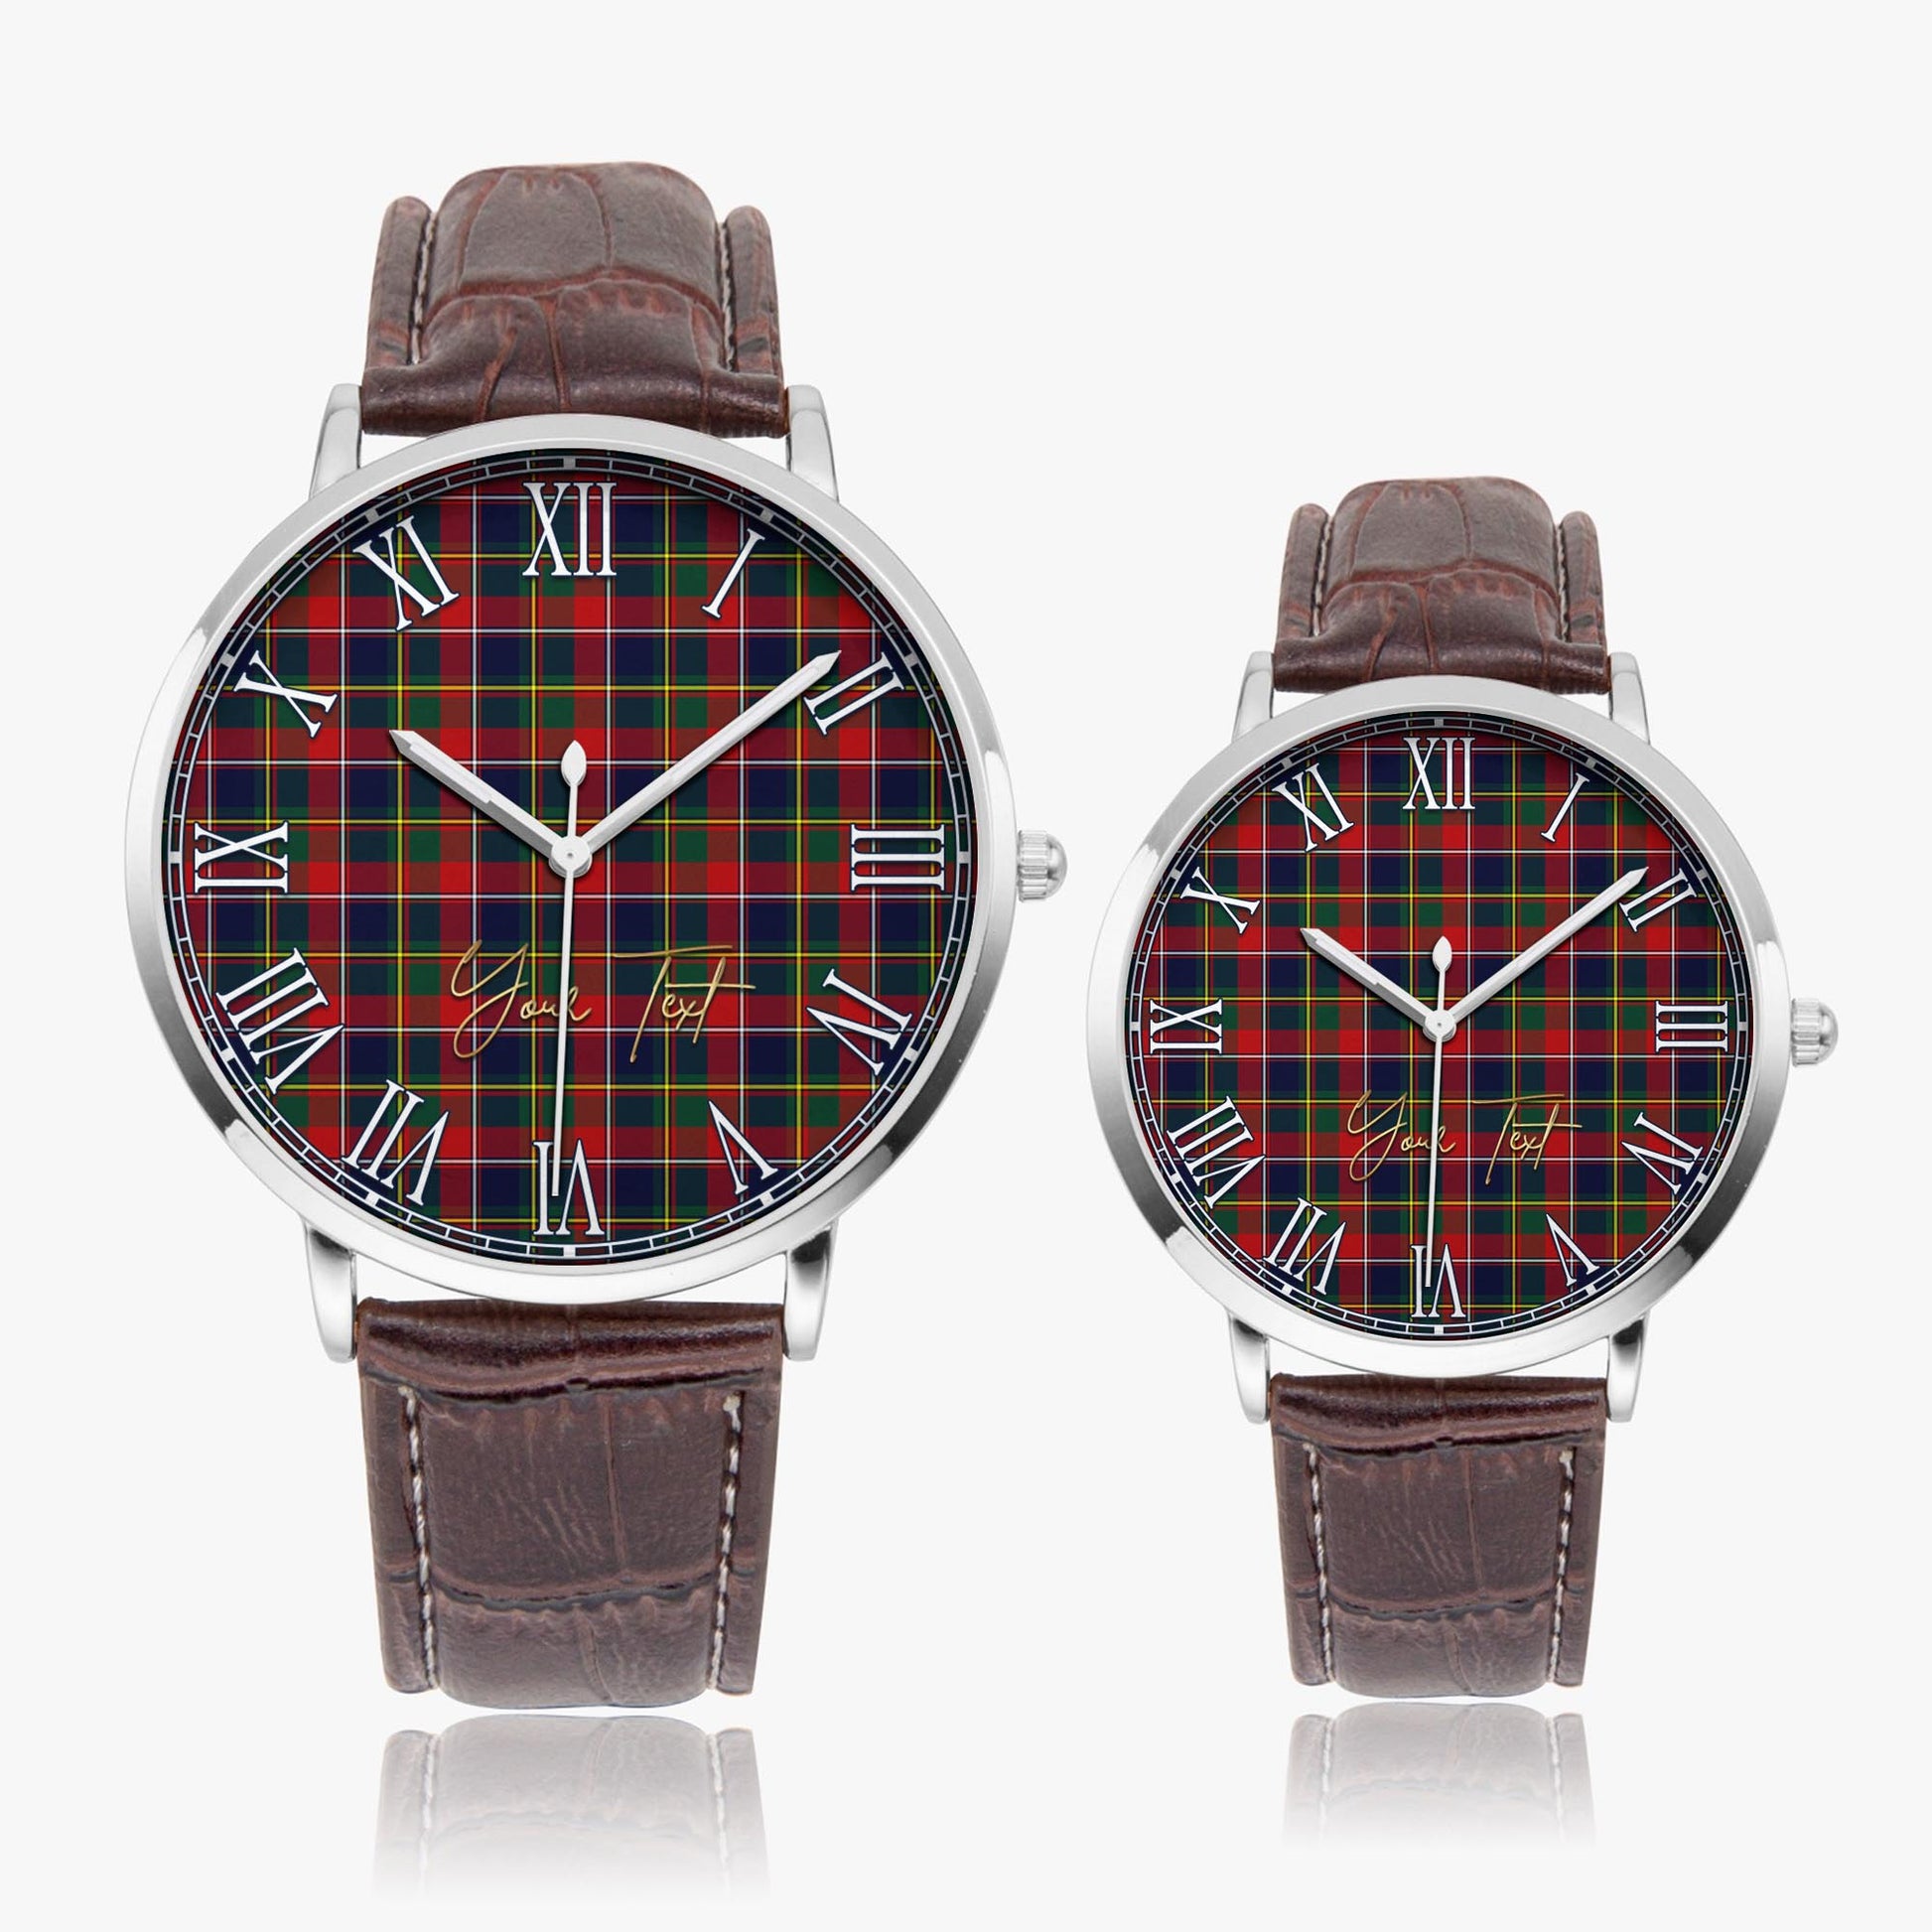 Quebec Province Canada Tartan Personalized Your Text Leather Trap Quartz Watch Ultra Thin Silver Case With Brown Leather Strap - Tartanvibesclothing